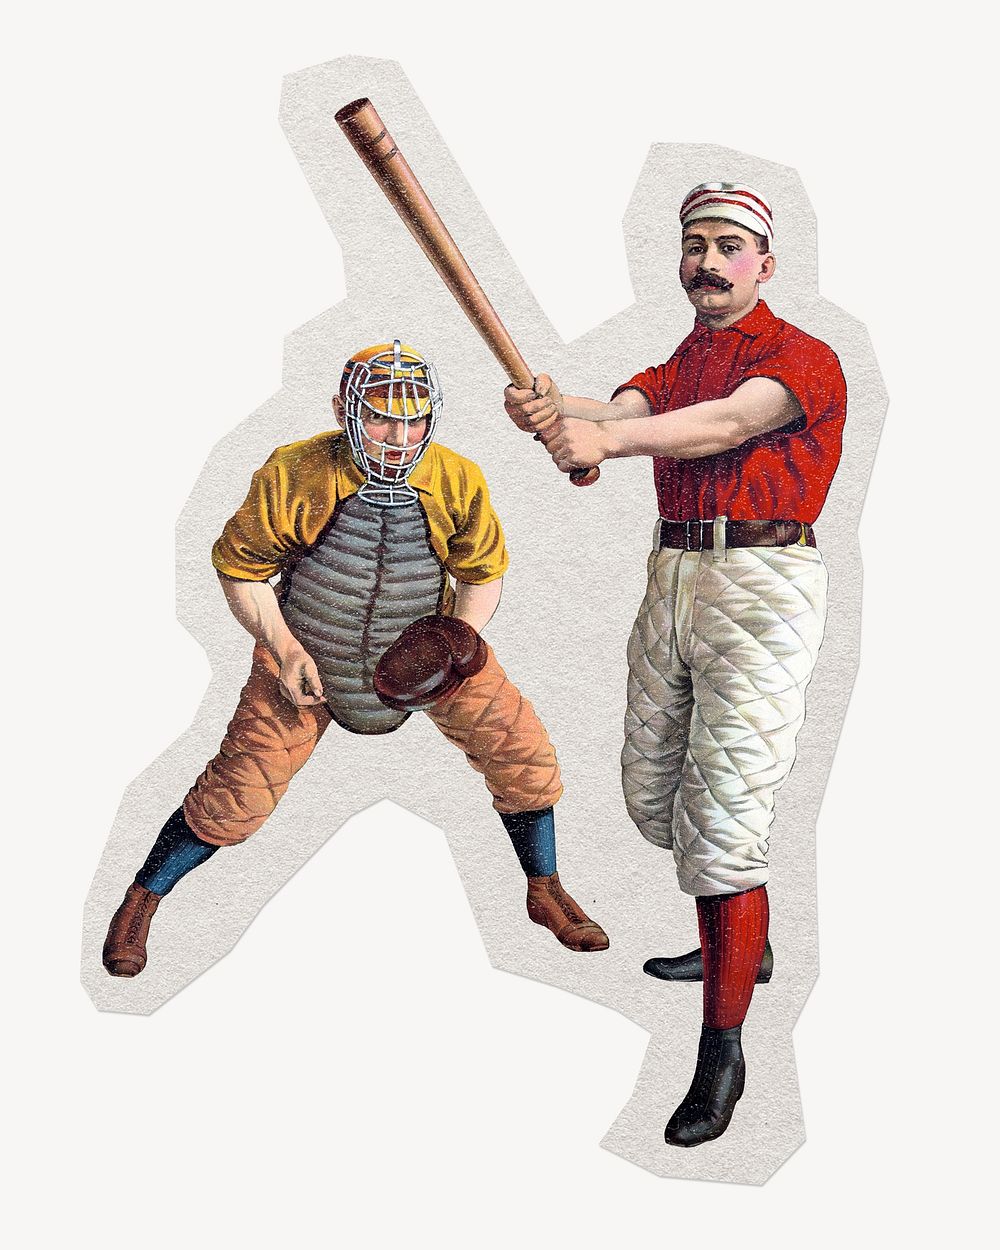 Vintage baseball players, paper collage element, remixed by rawpixel.